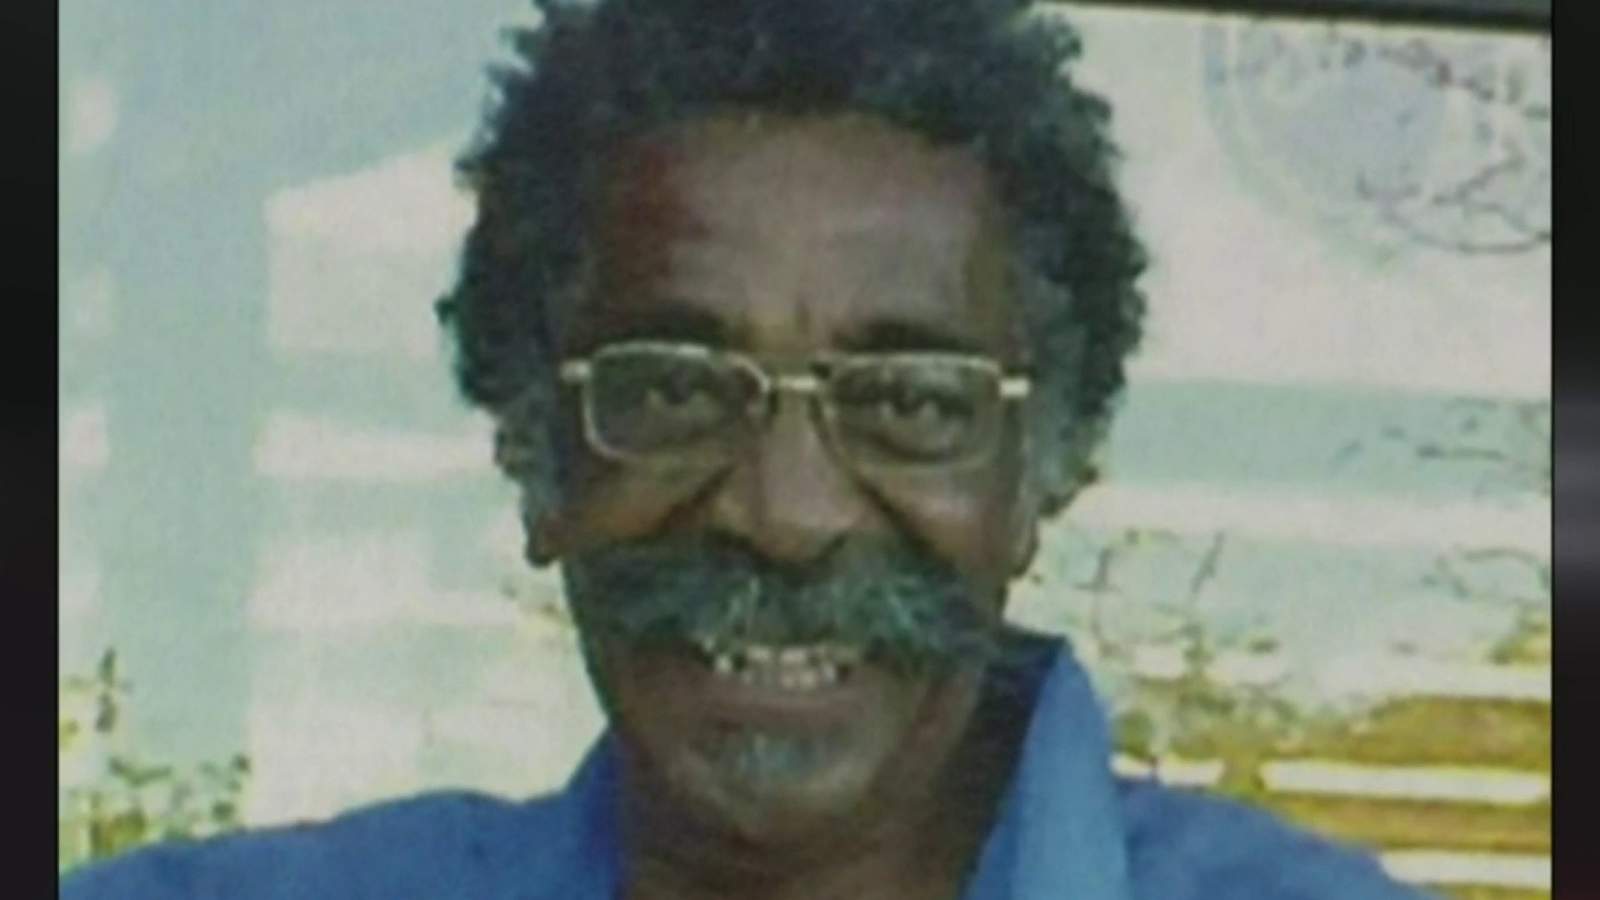 Family searching for answers in 2015 unsolved murder of 69-year-old man in Detroit